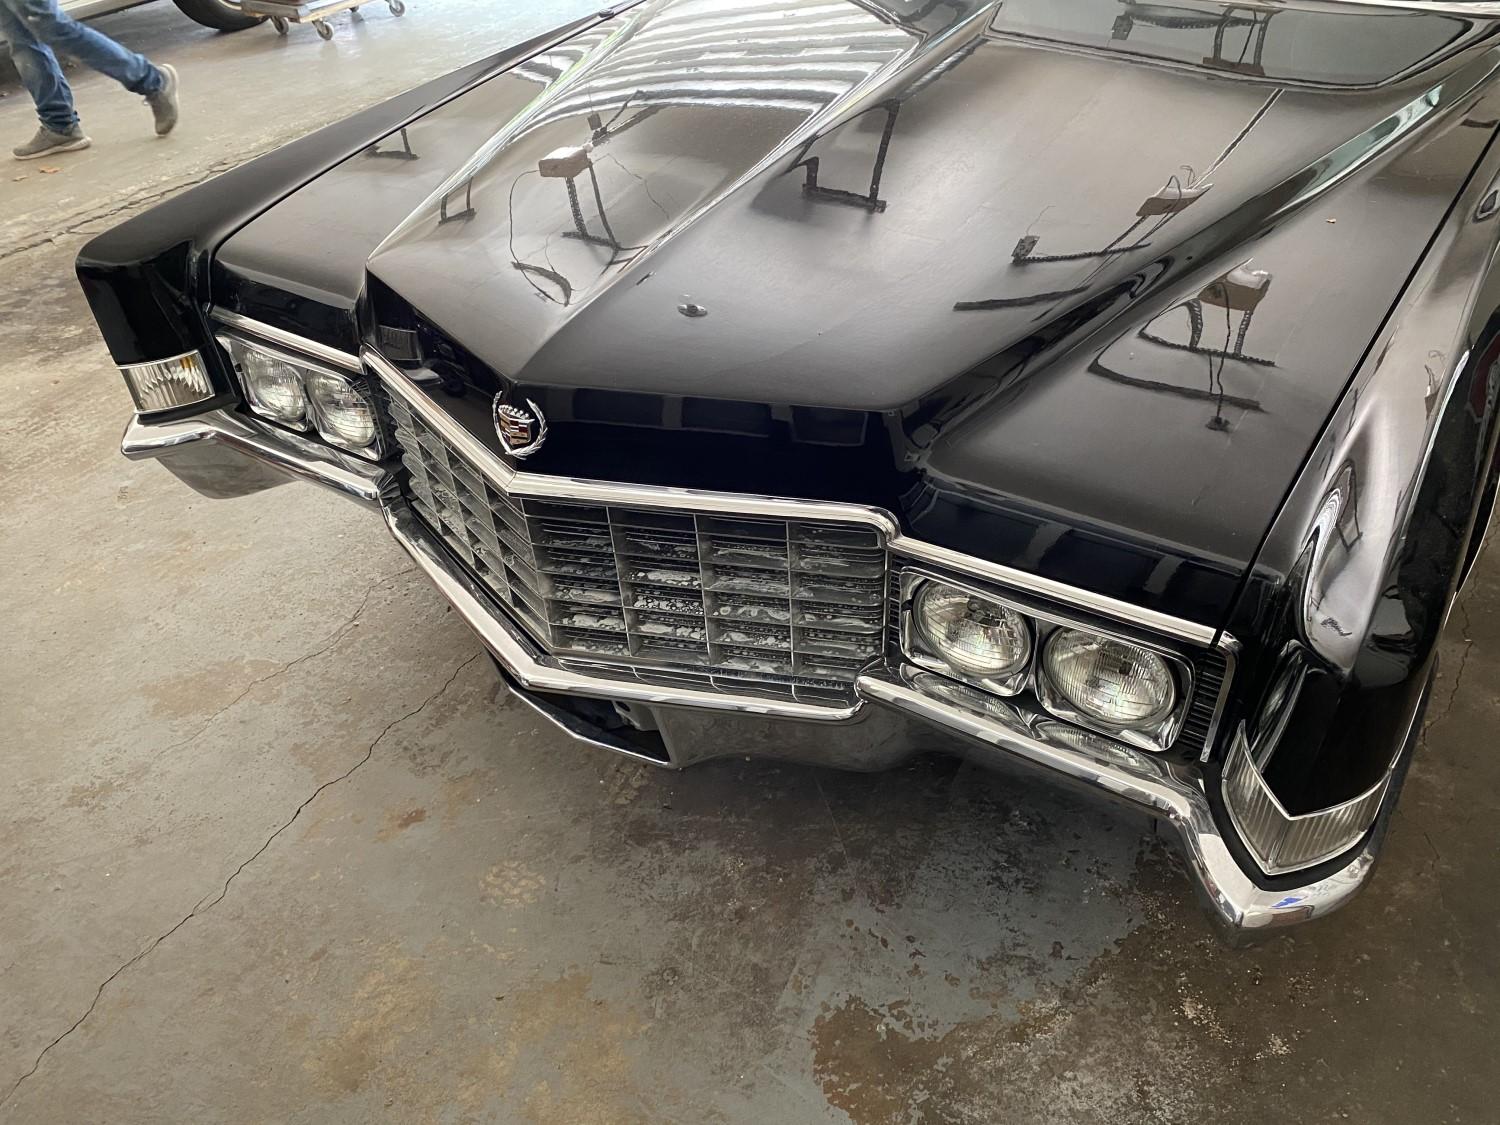 1969 Cadillac Fleetwood 60 Four Door Special - Used in Movie Brubaker